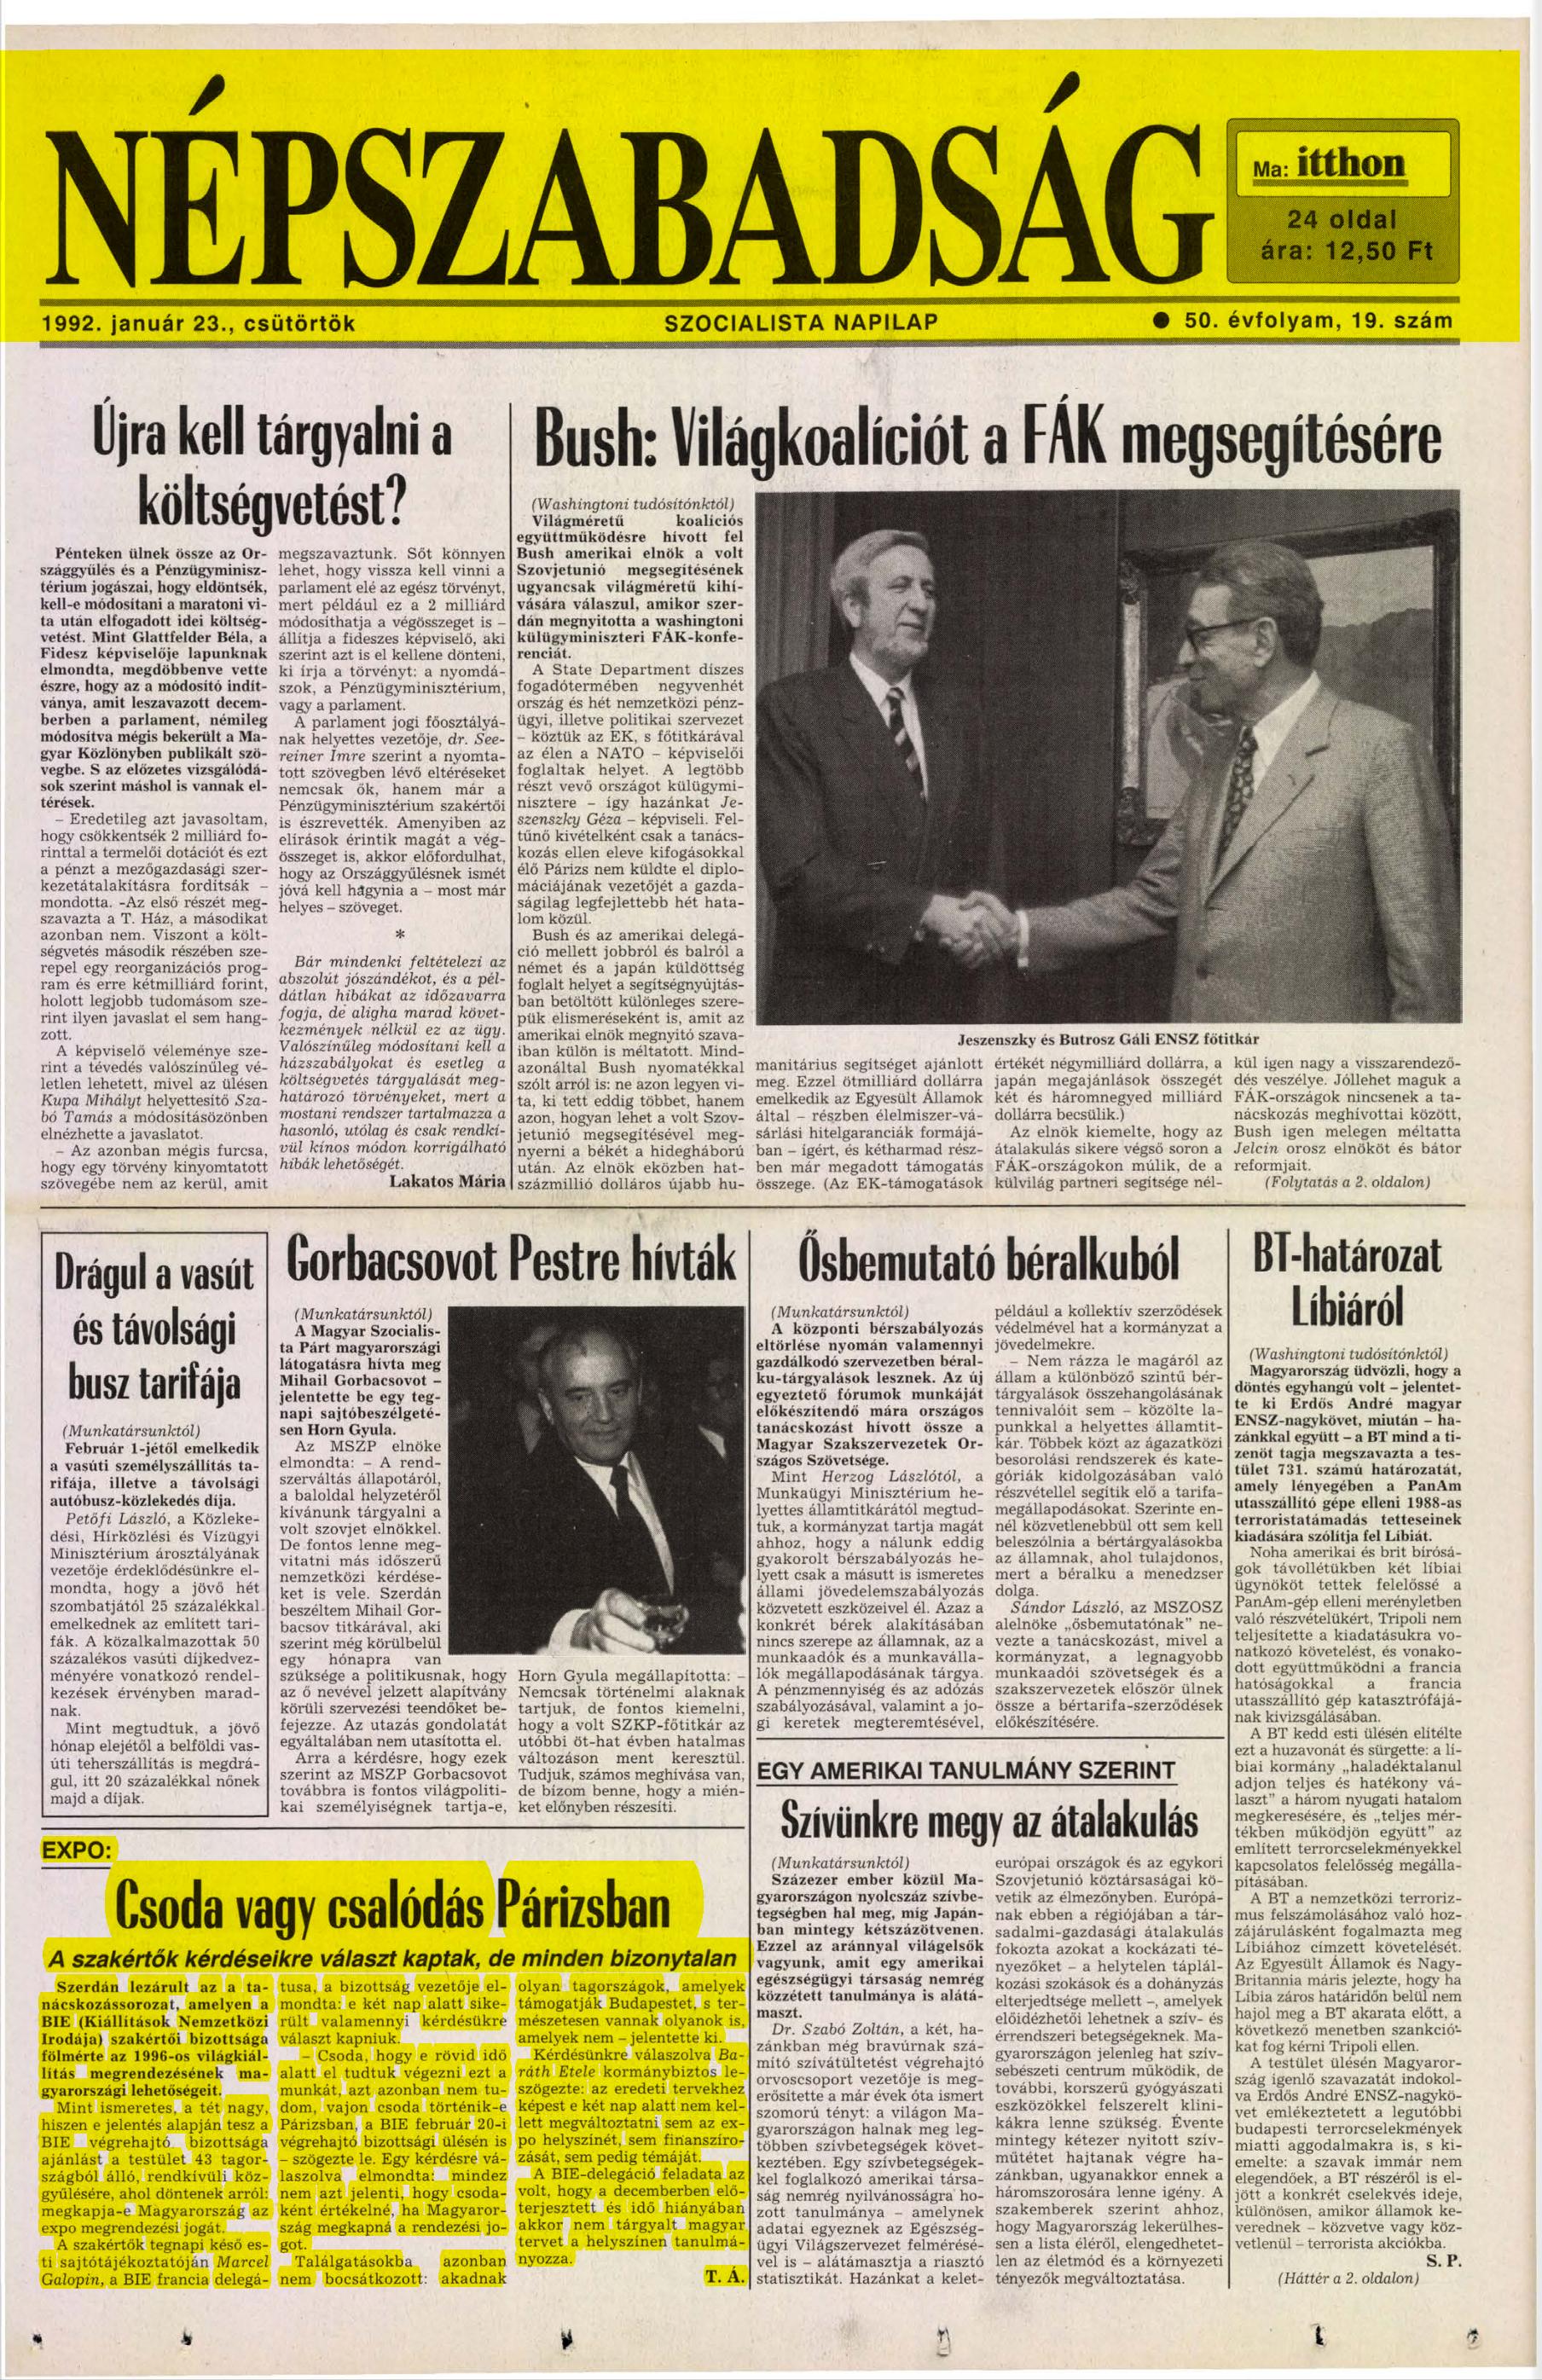 nepszabadsag_1992_01_pages368-368-page-001.jpg